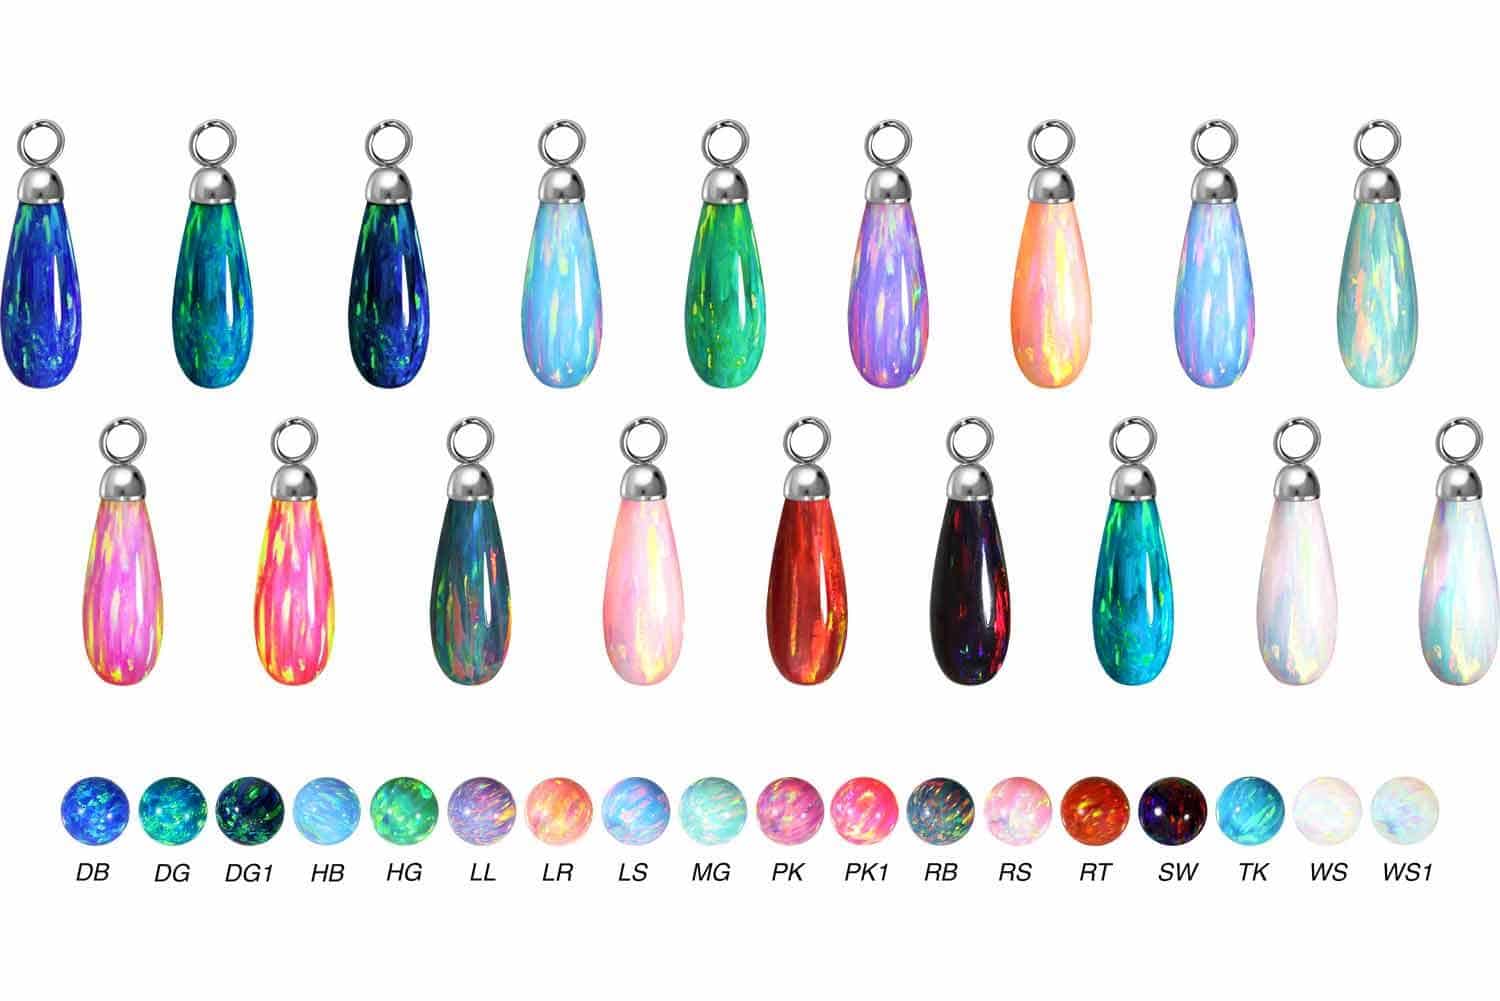 Synthetic opal pendant for clickers DROP